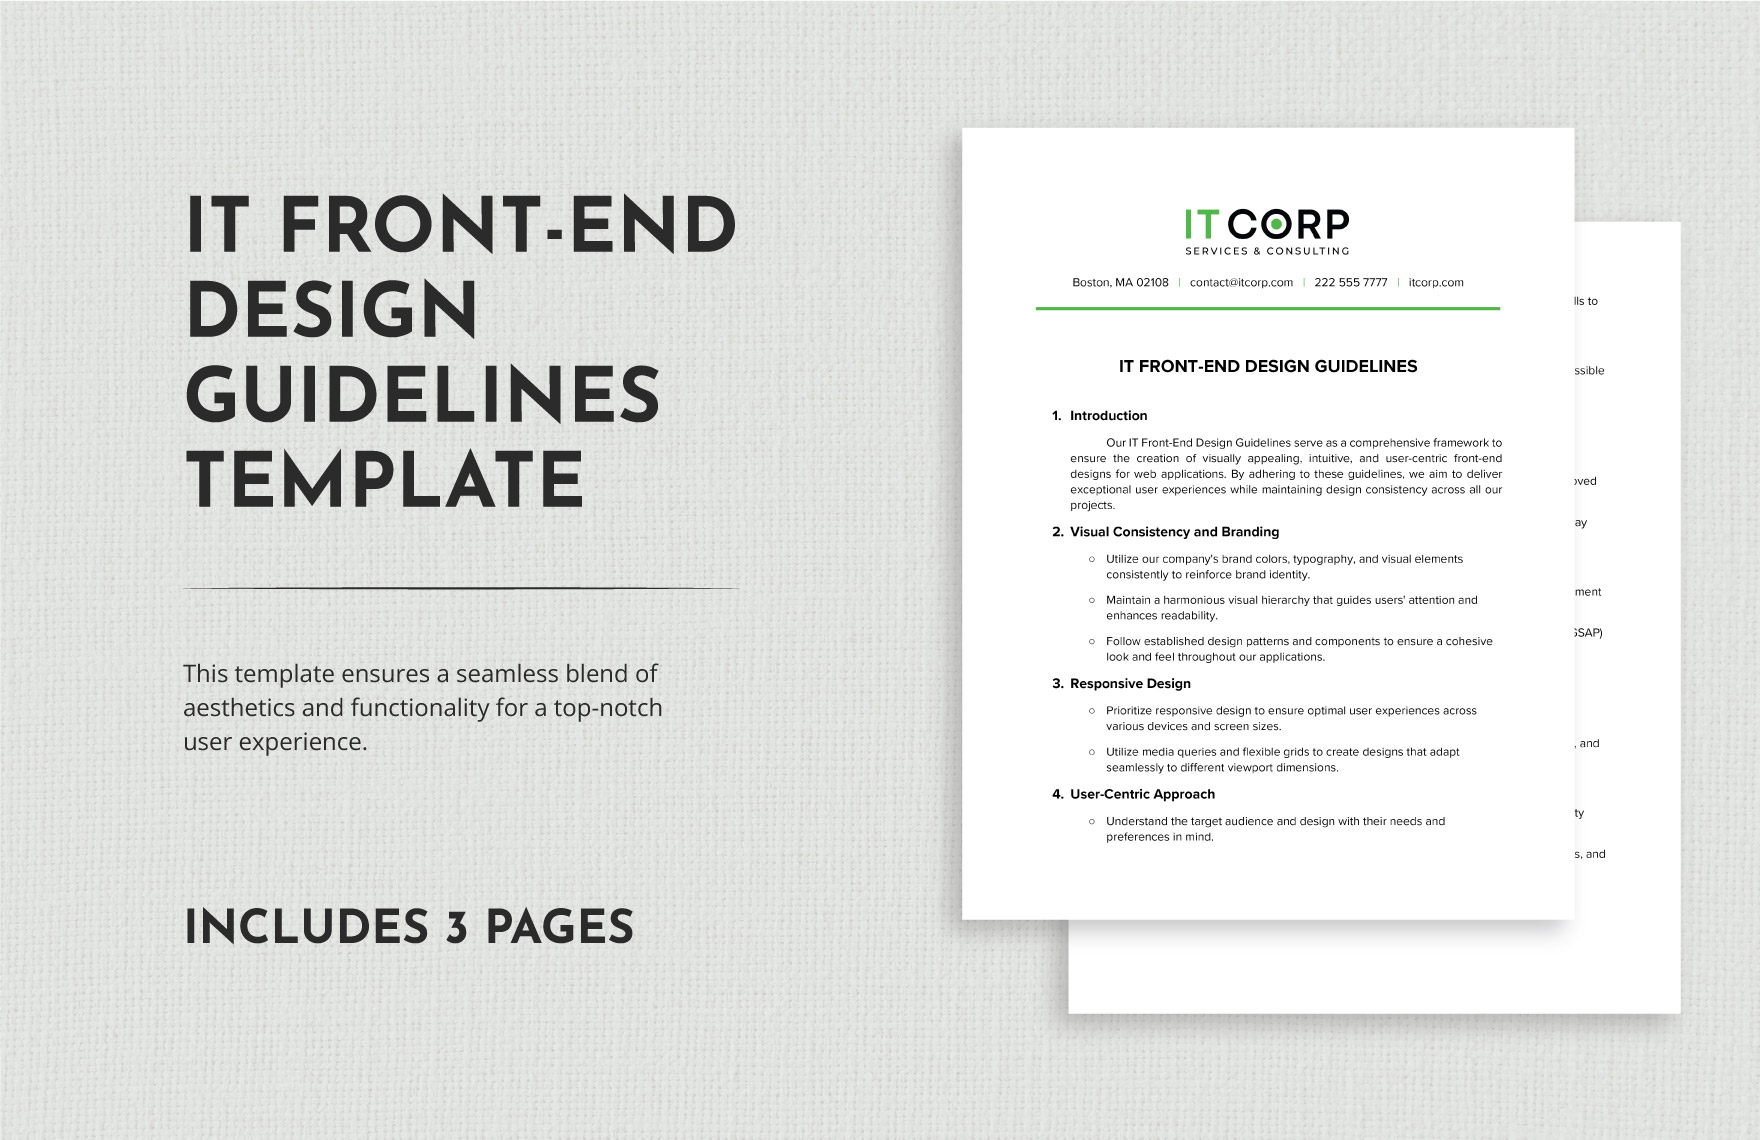 IT Front-End Design Guidelines Template